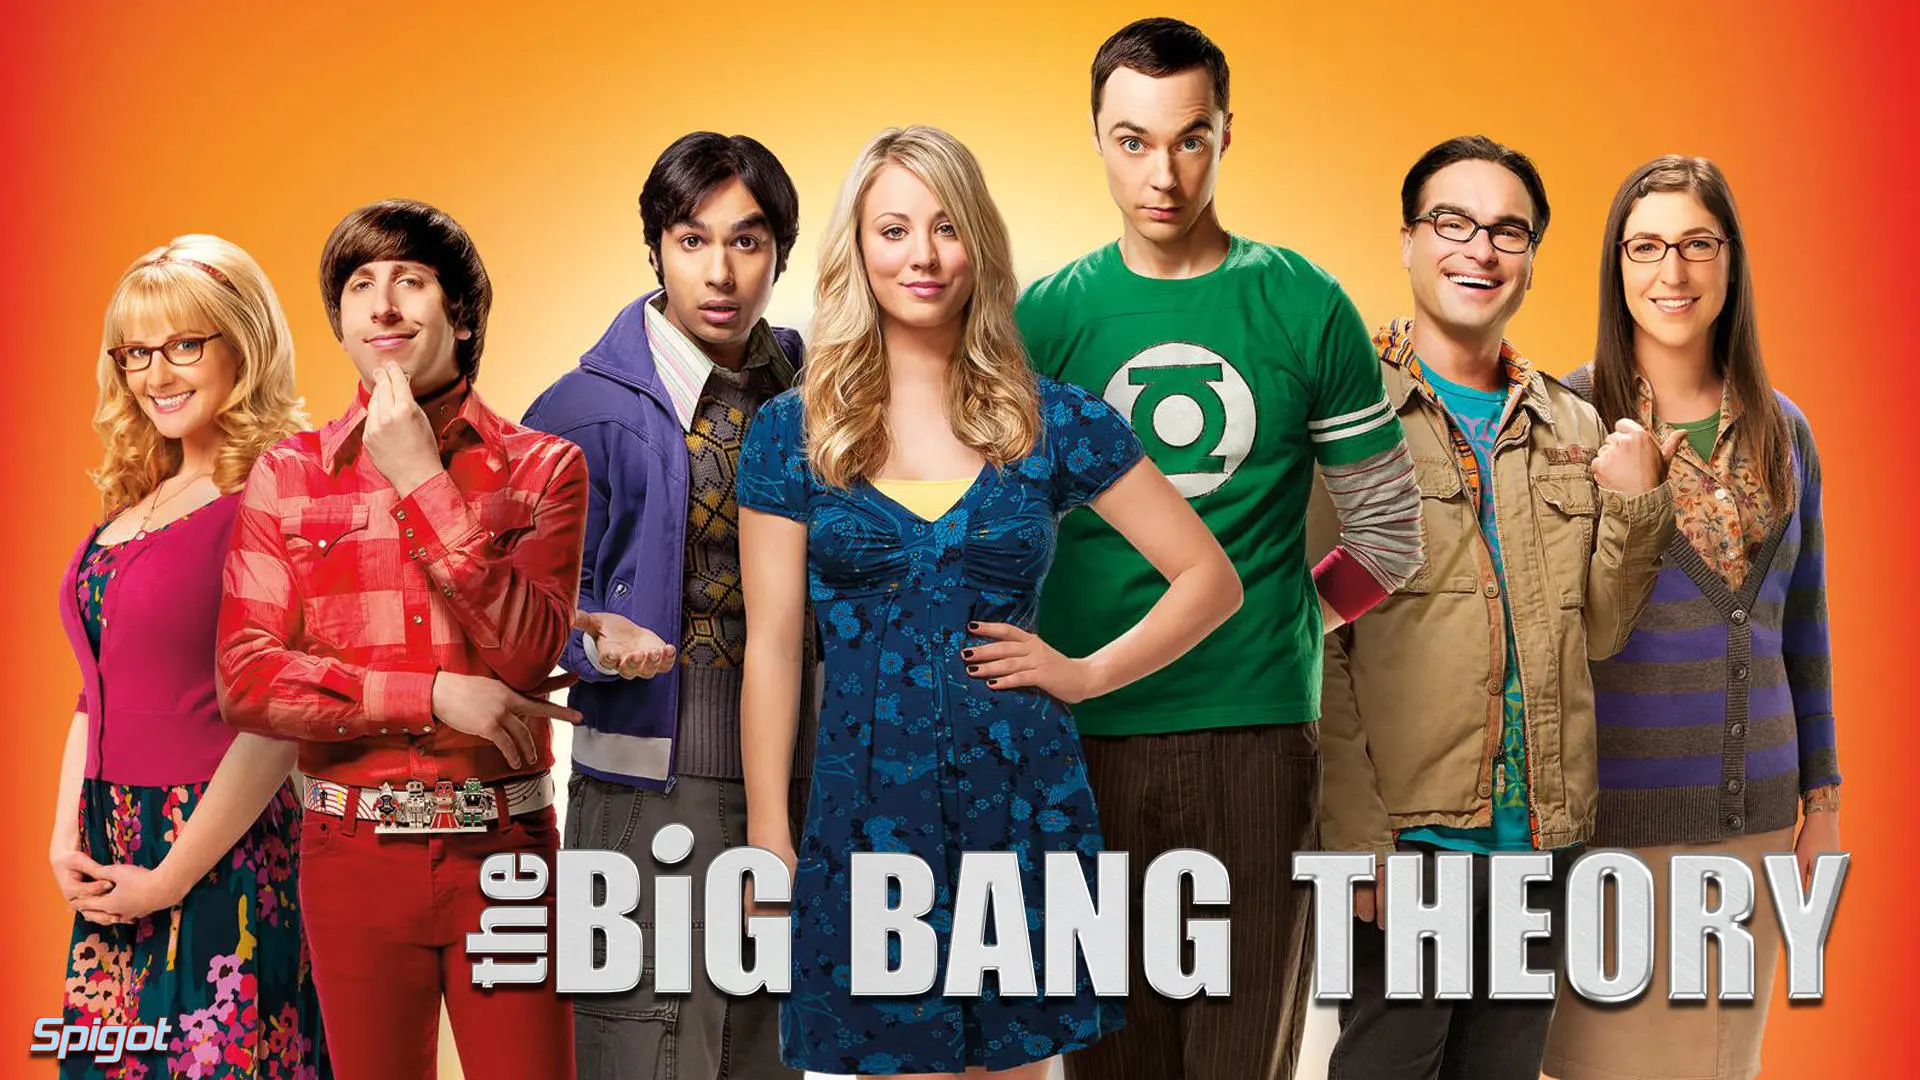 Facts About The Big Bang Theory